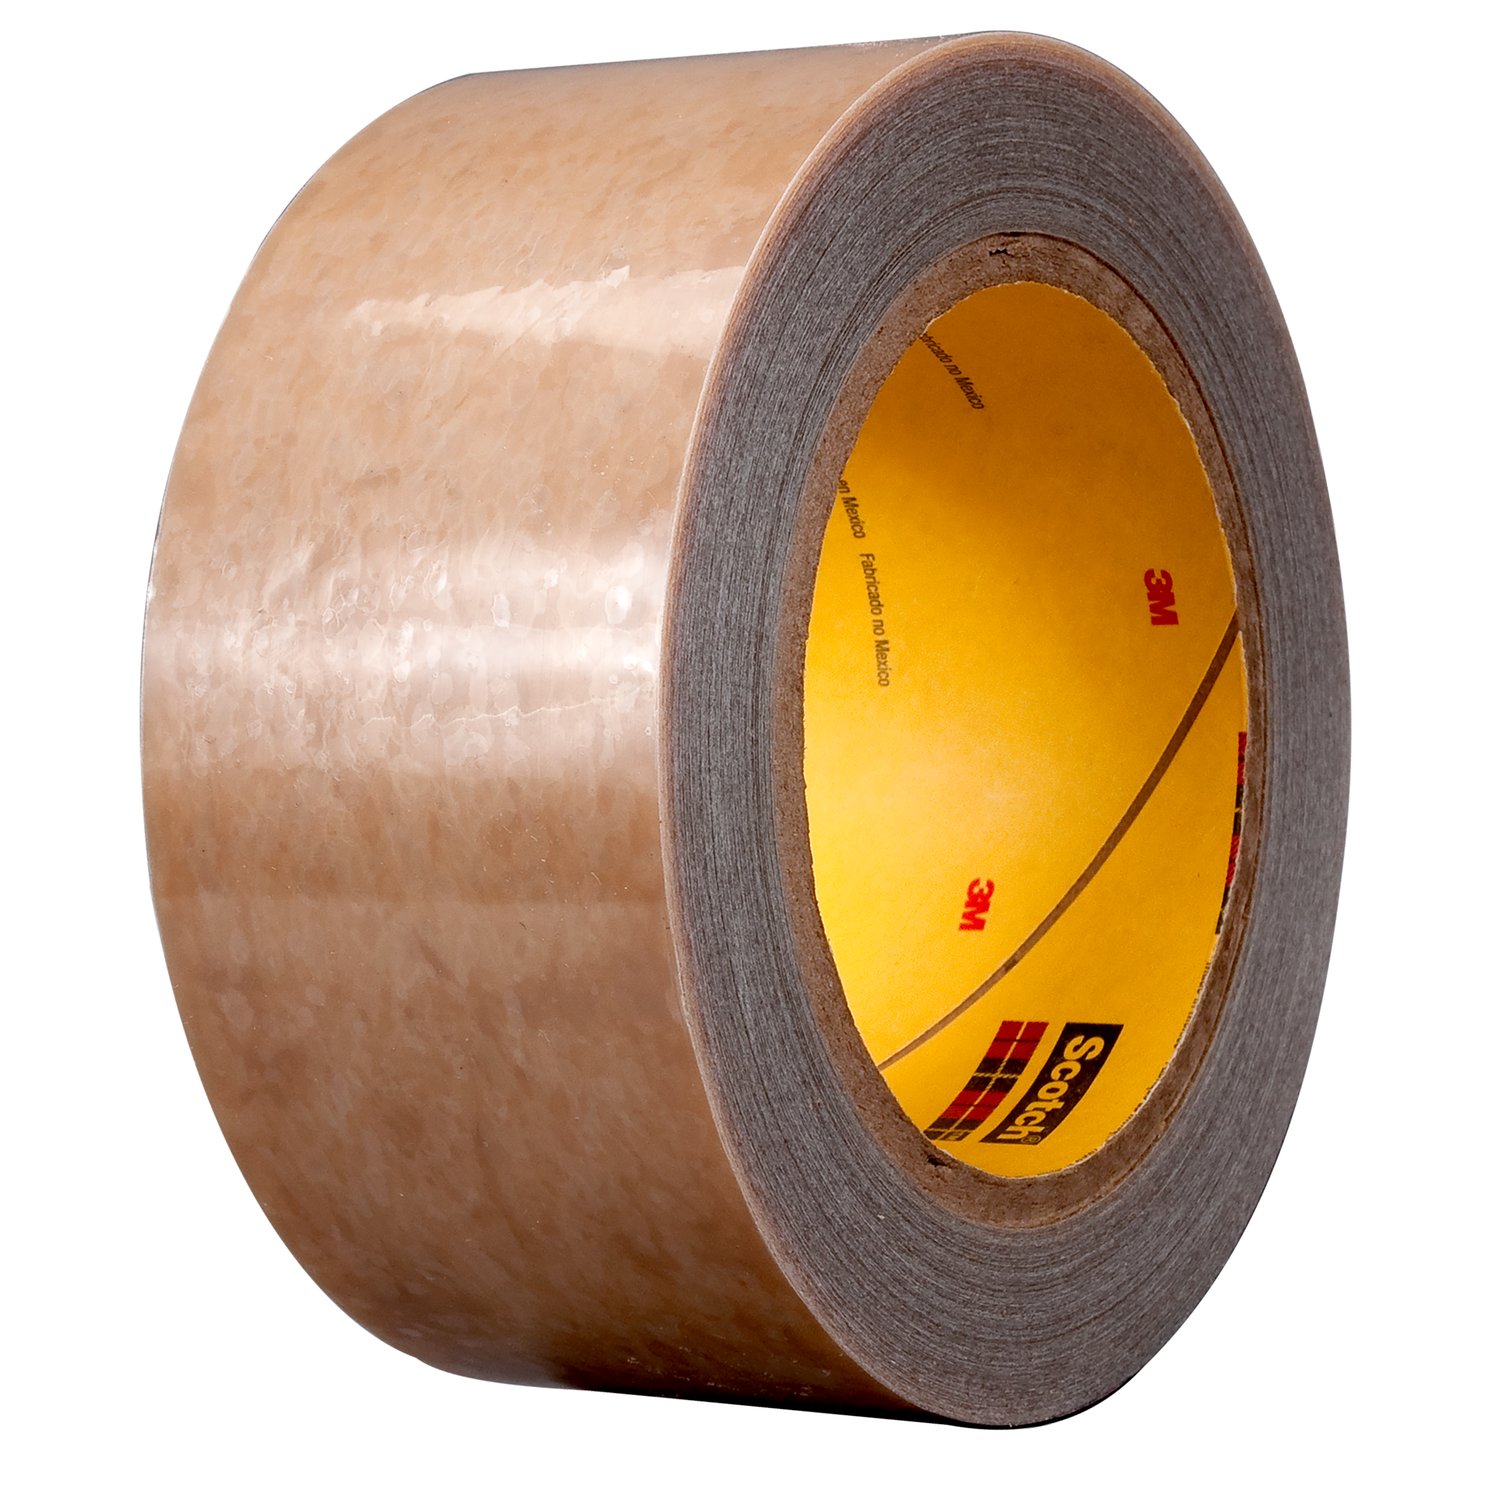 00021200055768, 3M Polyester Protective Tape 336, Transparent, 12 in x 144  yd, 1.5 mil, 1 roll per case, Aircraft products, surface-protective-tapes